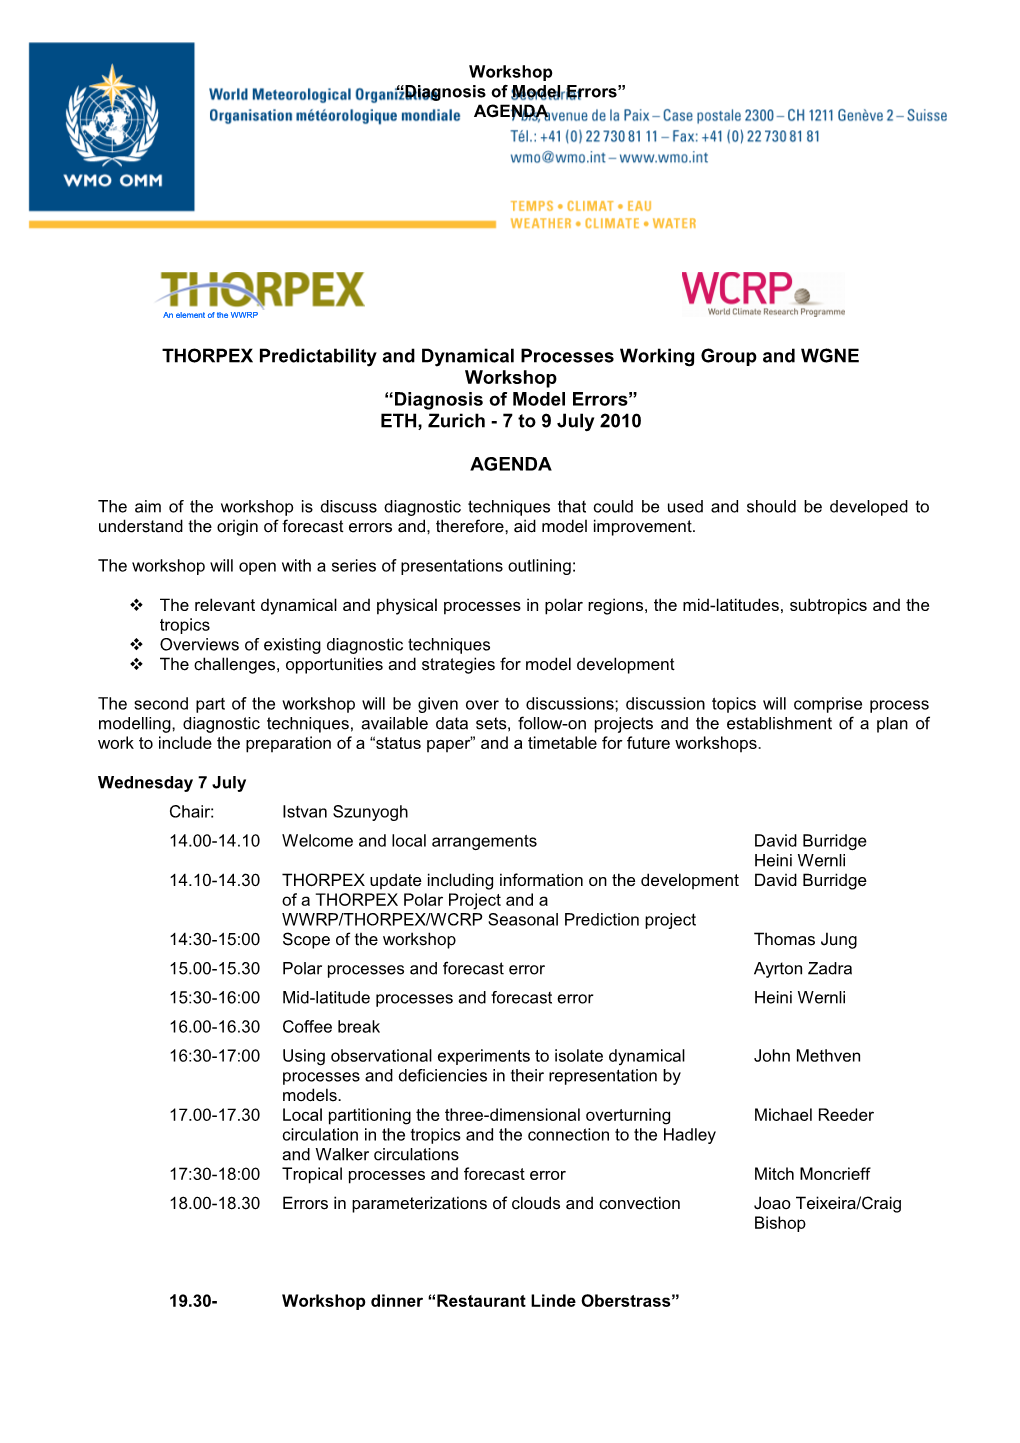 THORPEX Predictability and Dynamical Processes Working Group and WGNE